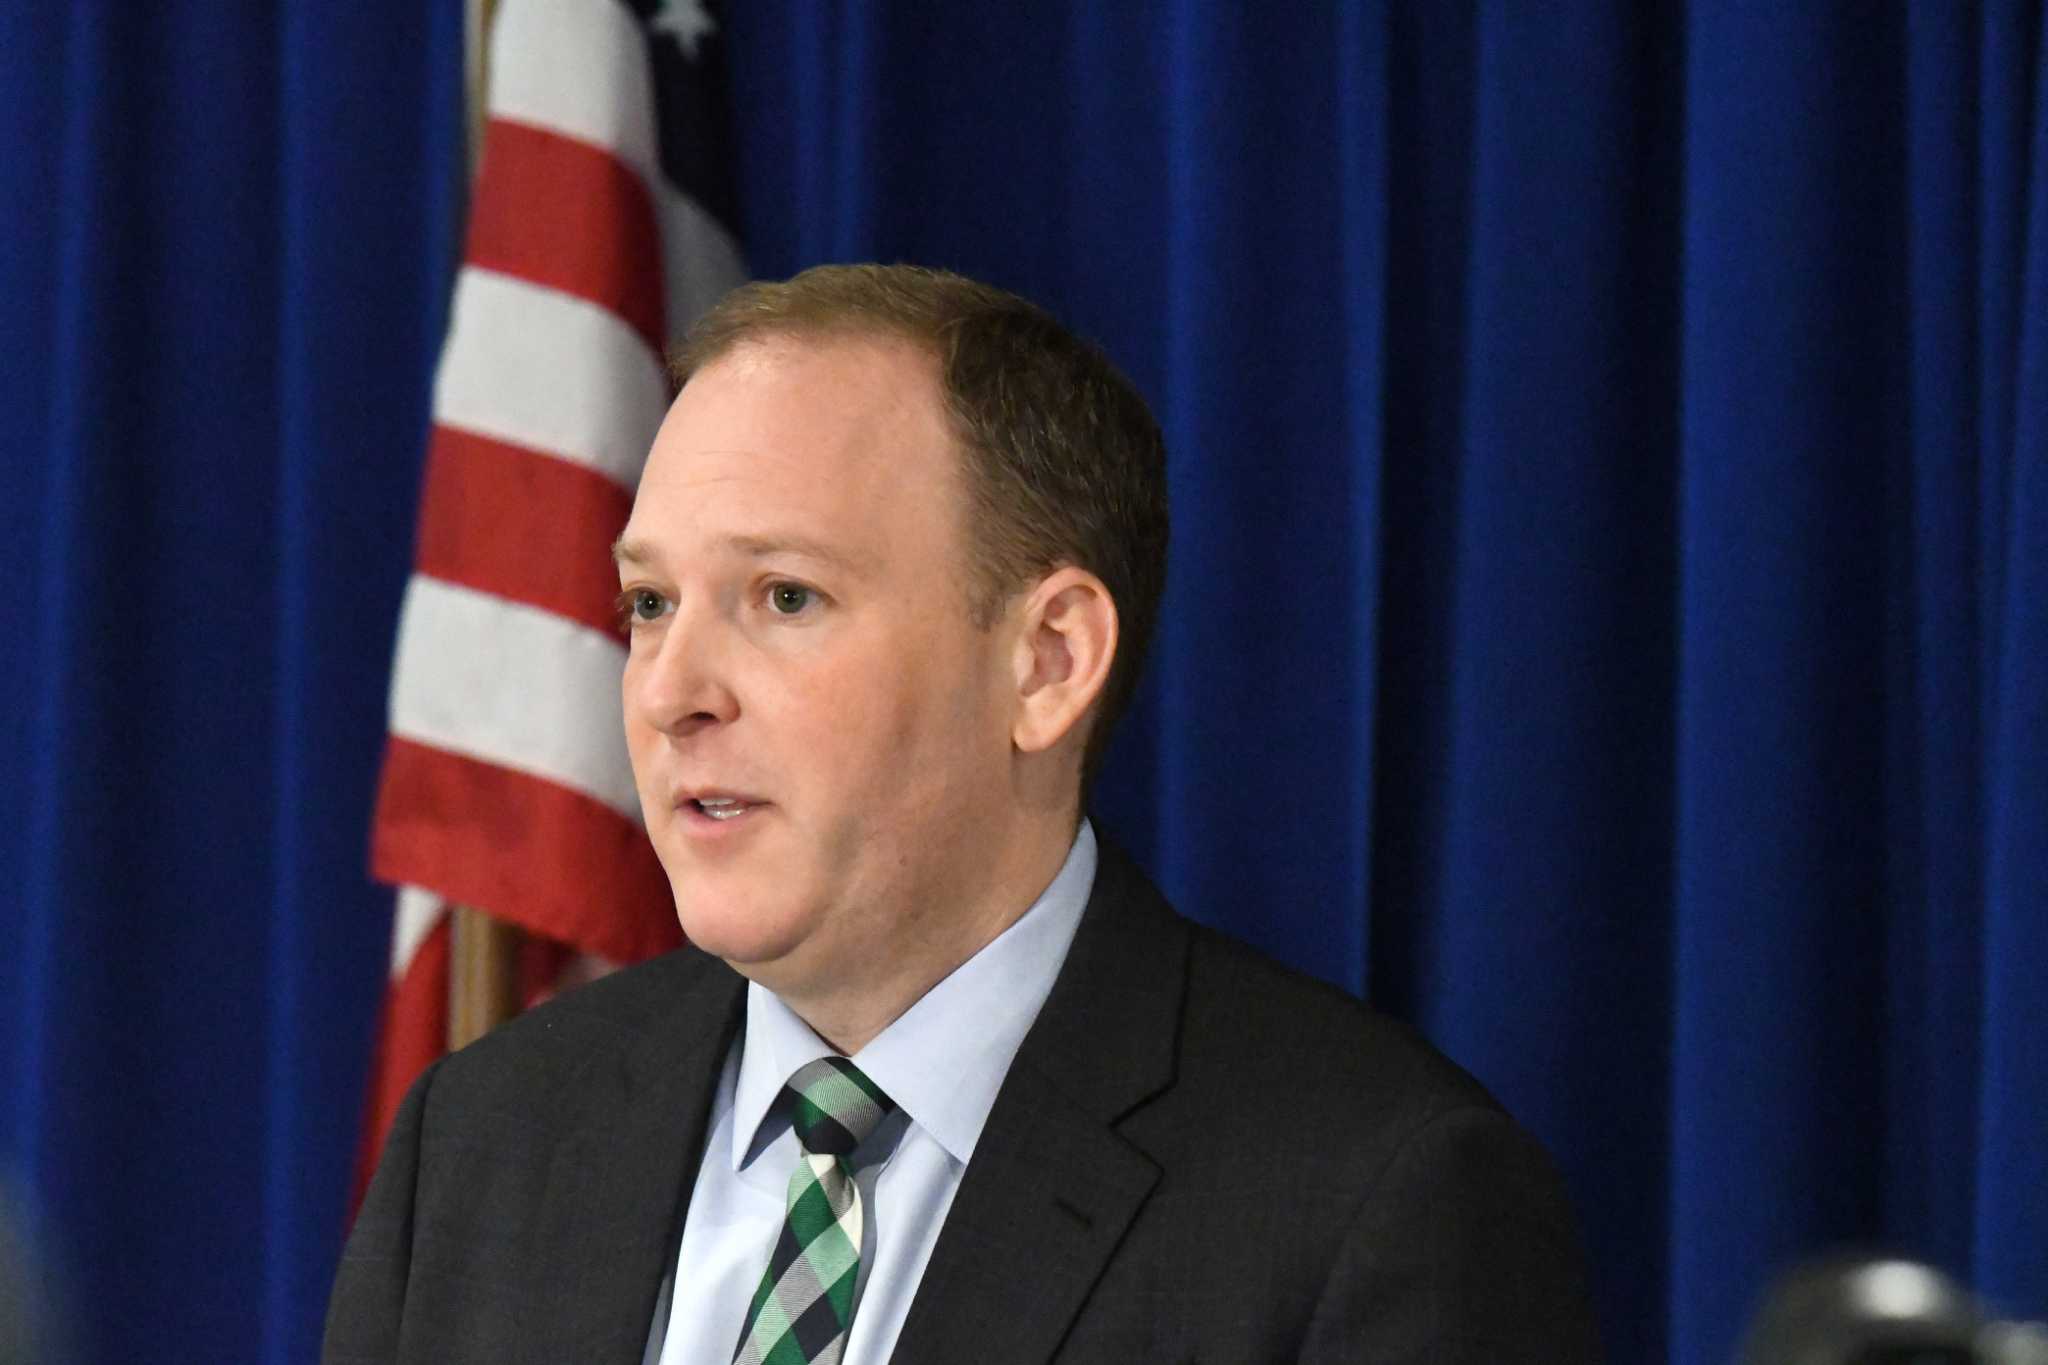 Zeldin is lone GOP nominee for governor as Republicans focus agenda on crime